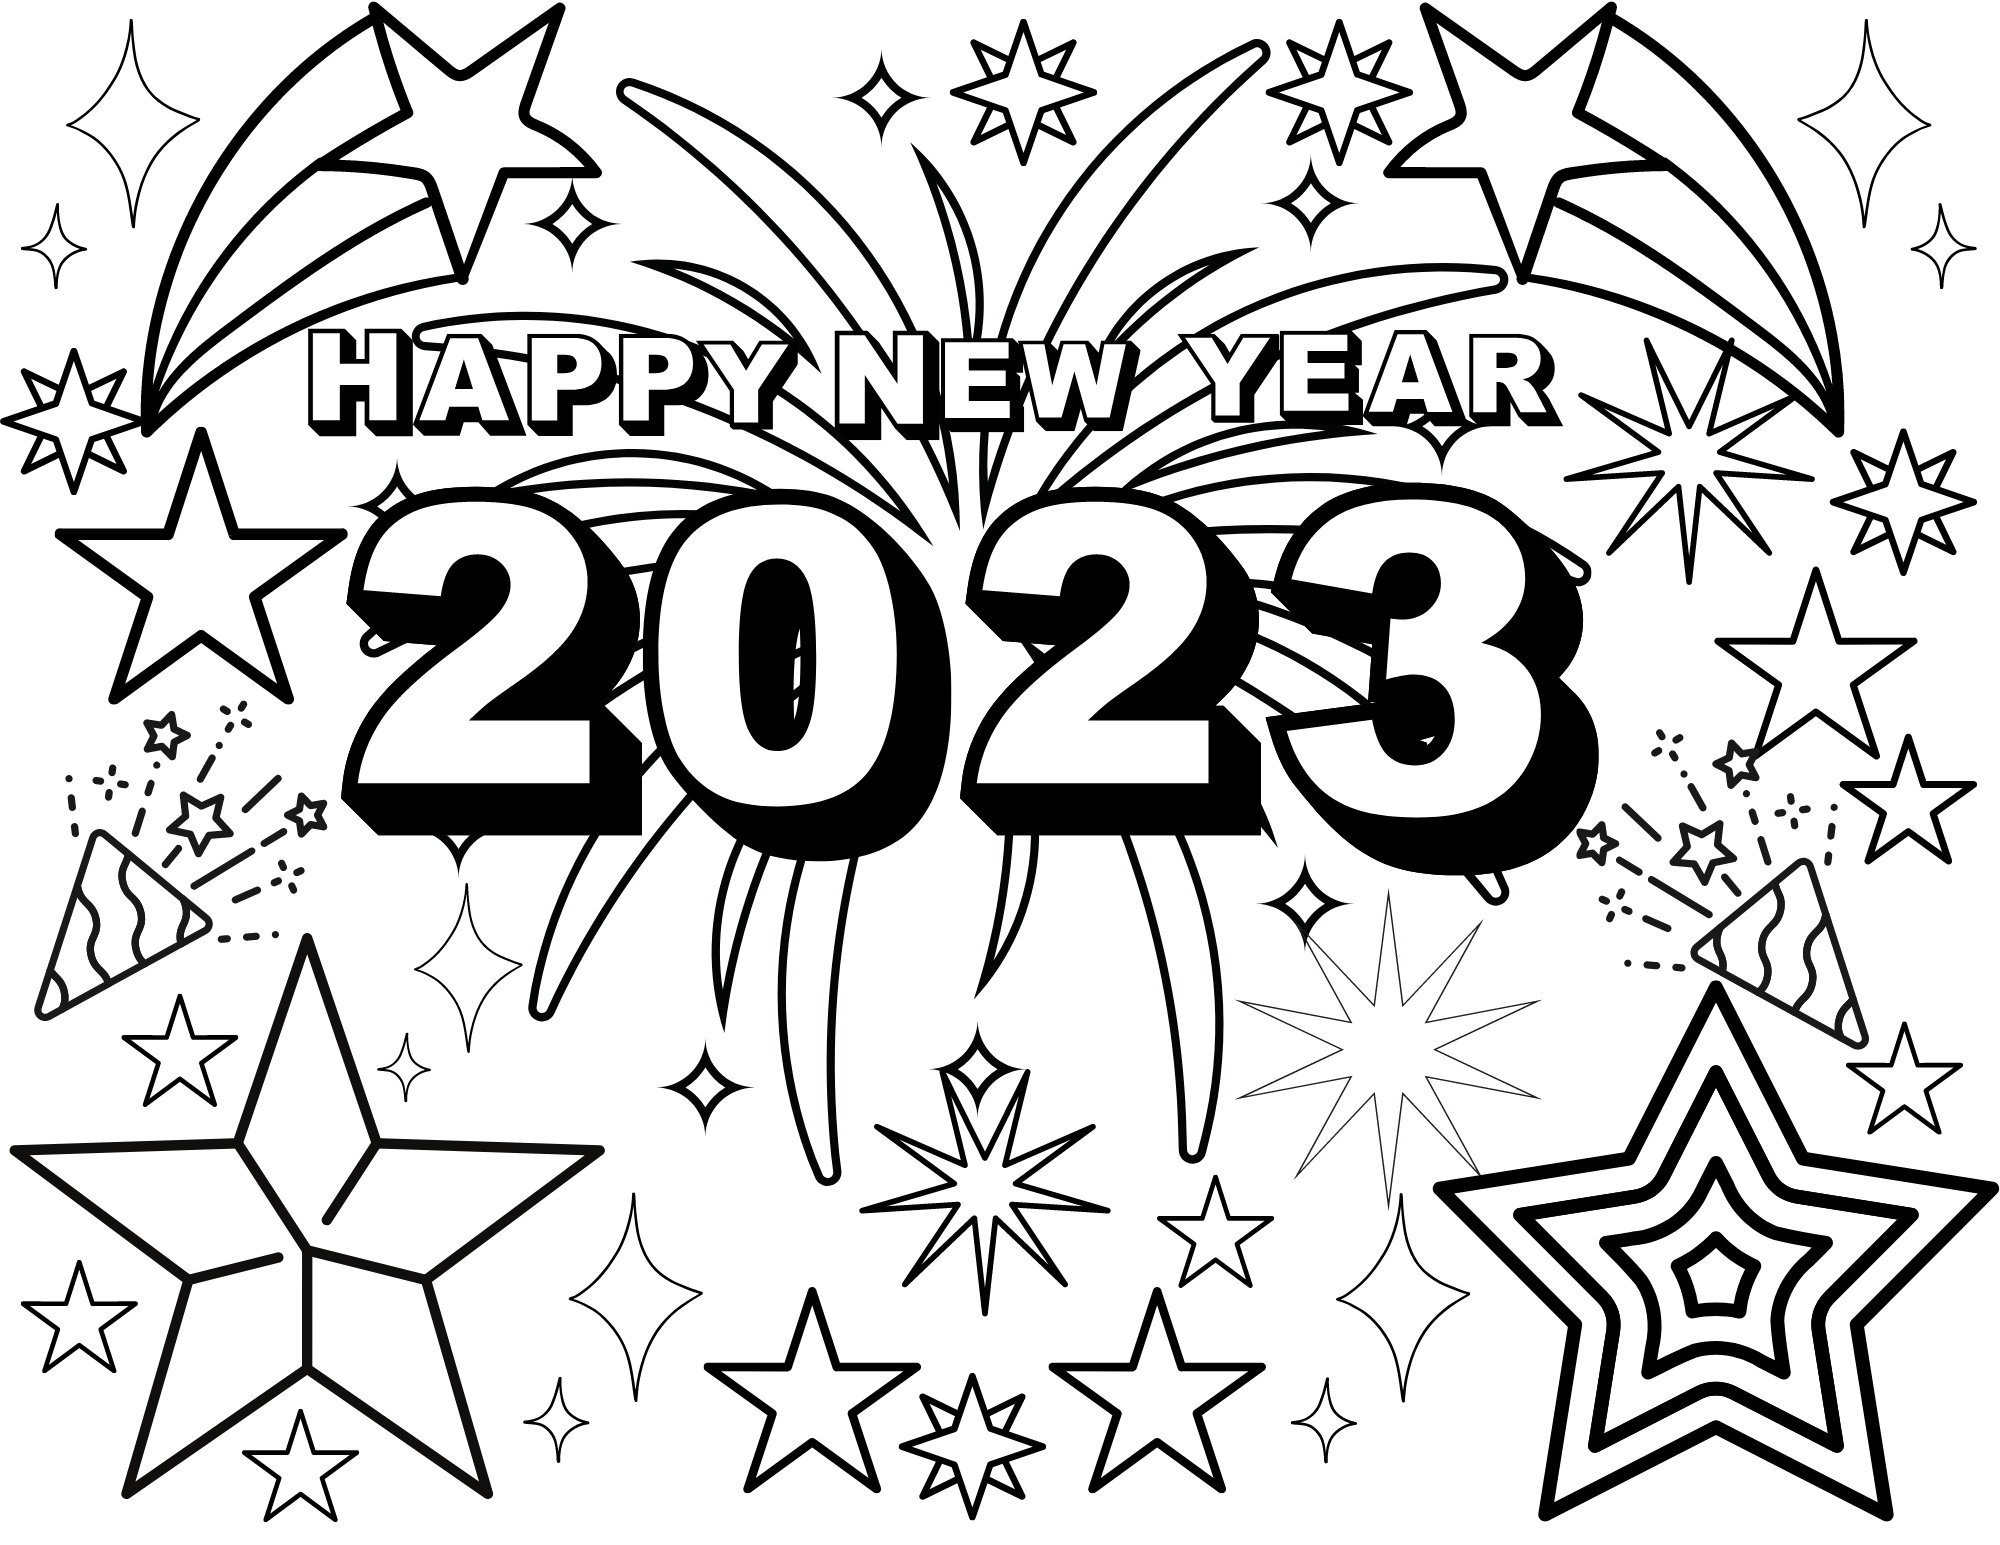 Happy new year coloring sheet